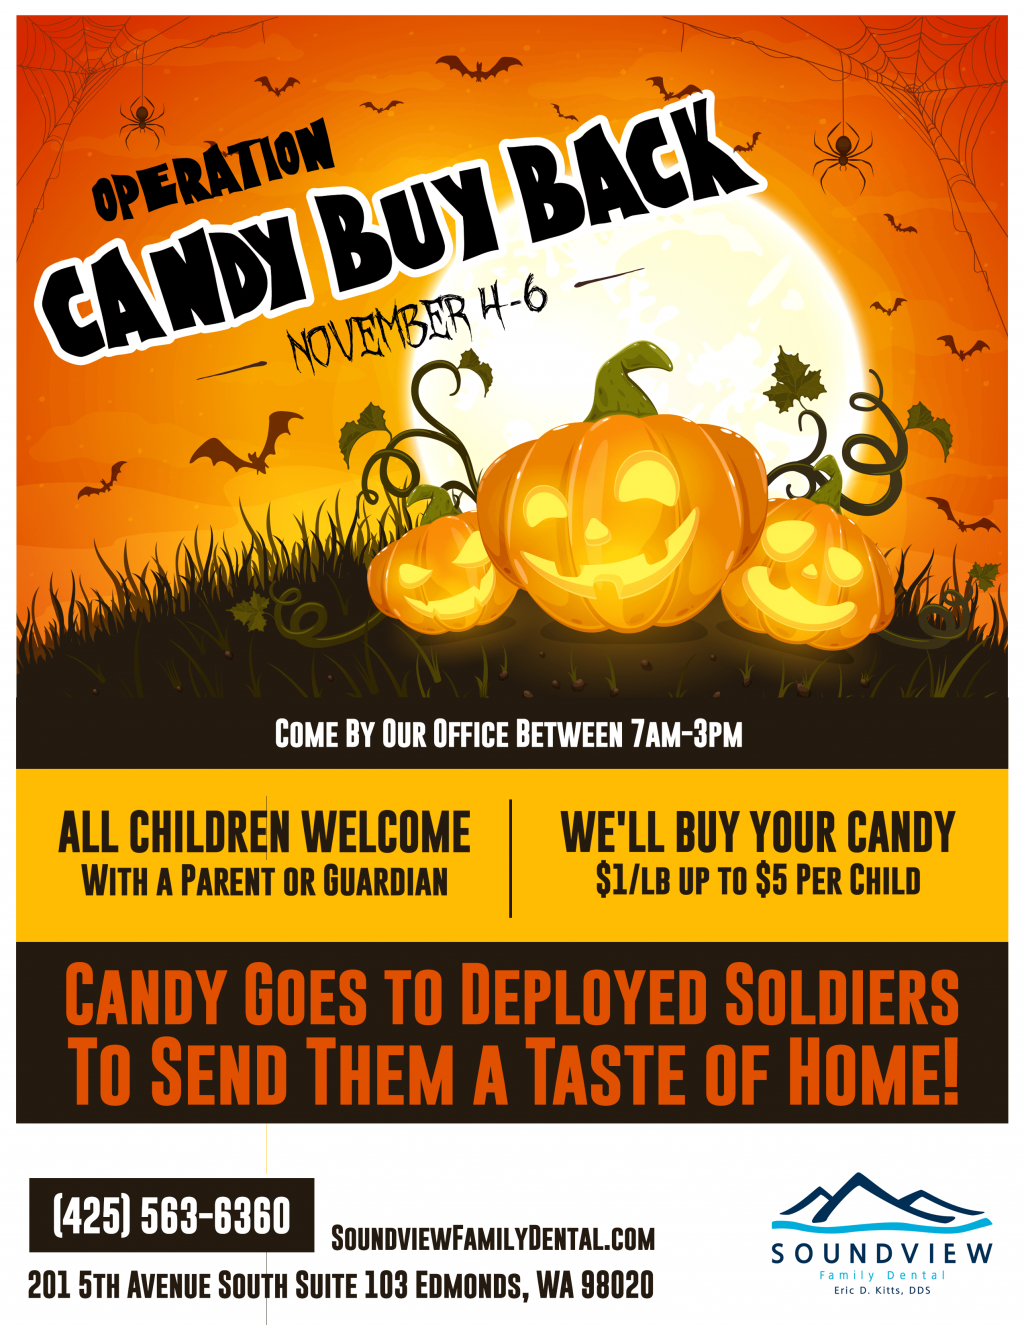 Operation Gratitude Halloween Give-Back Campaign at Soundview Family Dental in Edmonds, WA